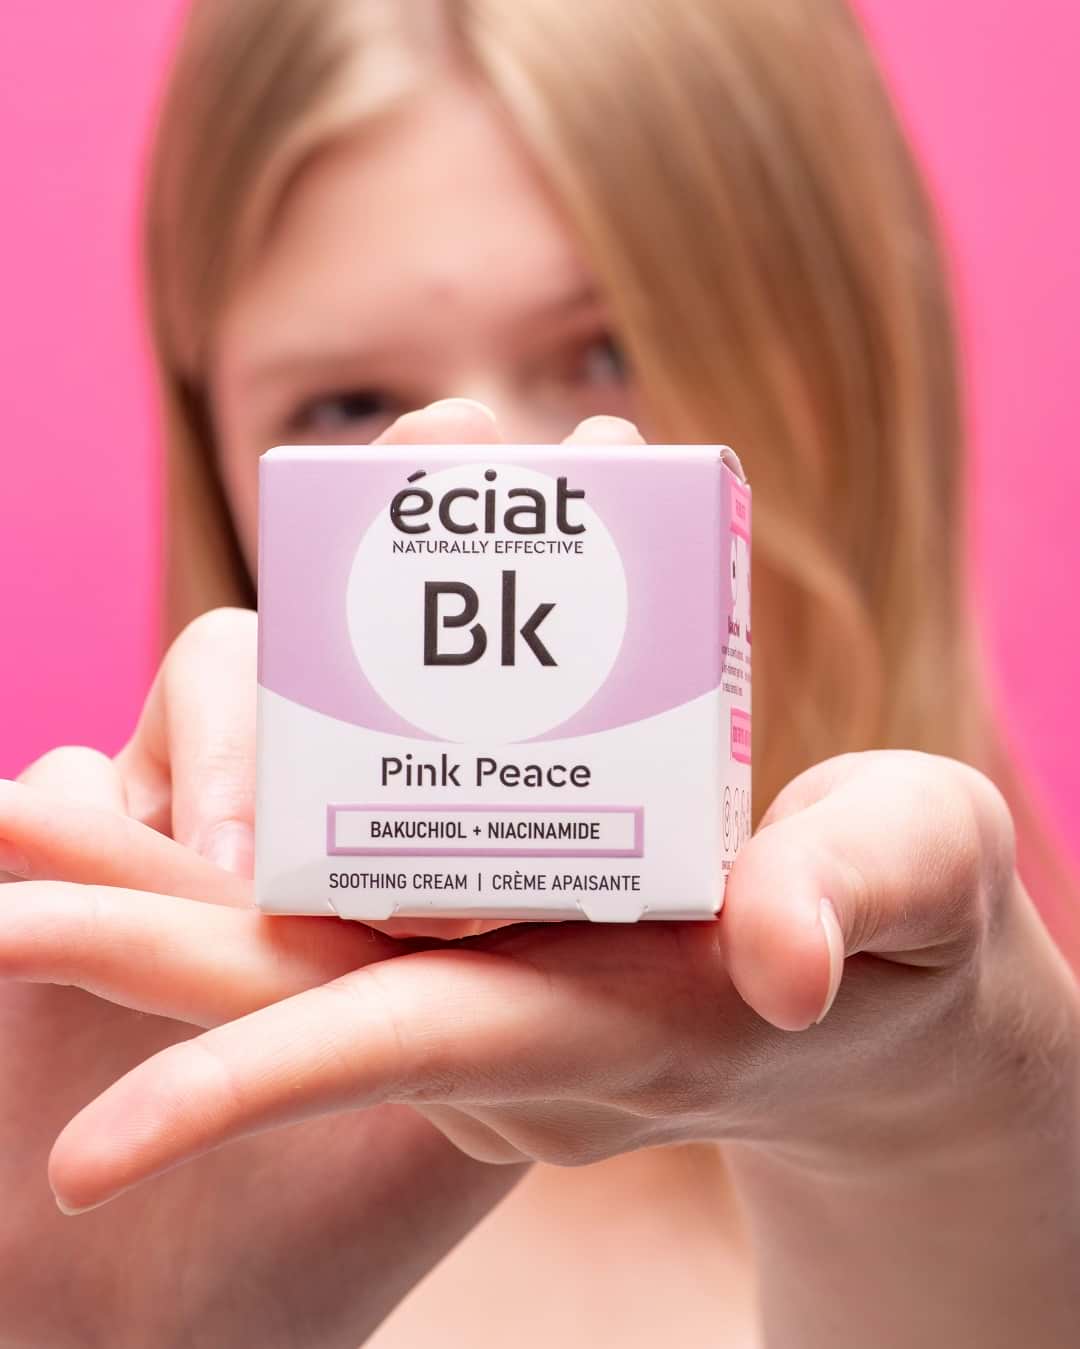 Pink Peace